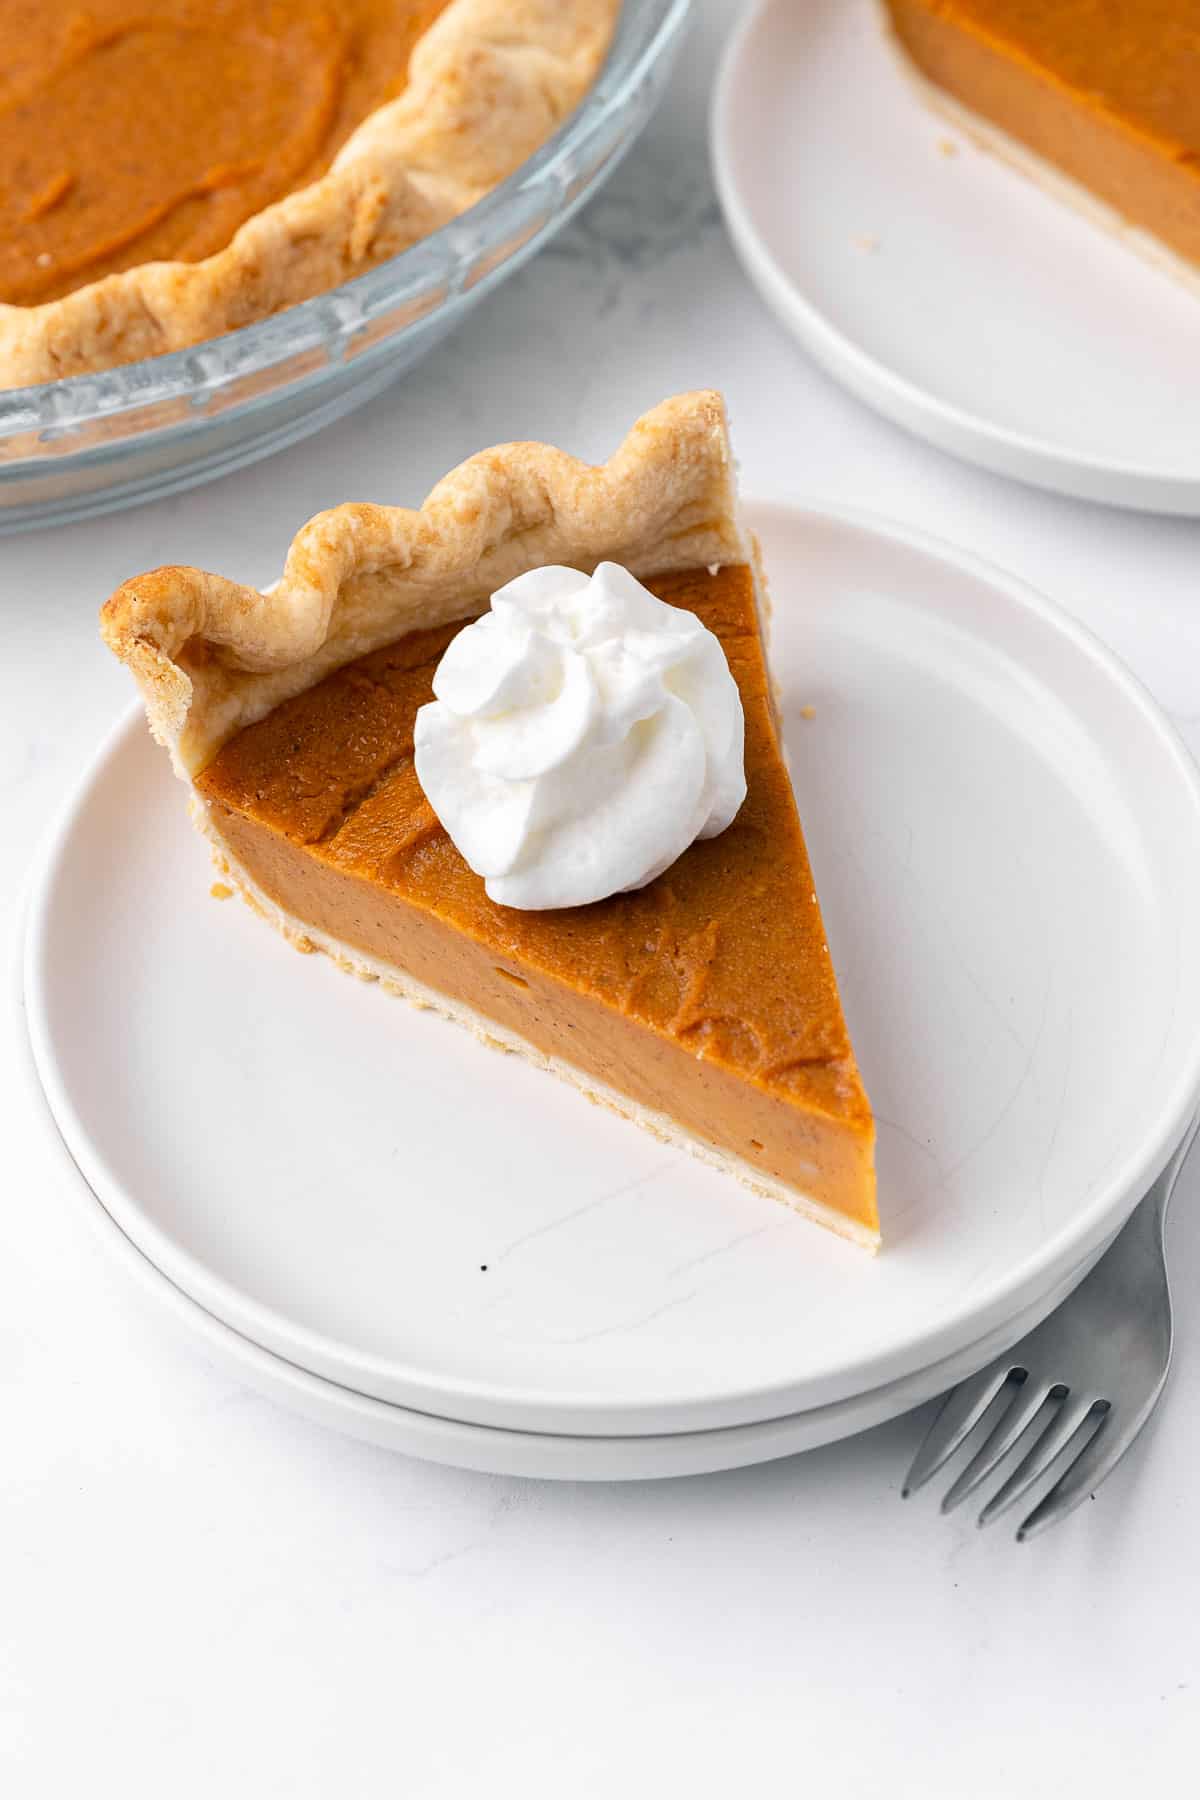 Slice of vegan sweet potato pie on a plate with a dollop of whipped cream on top.